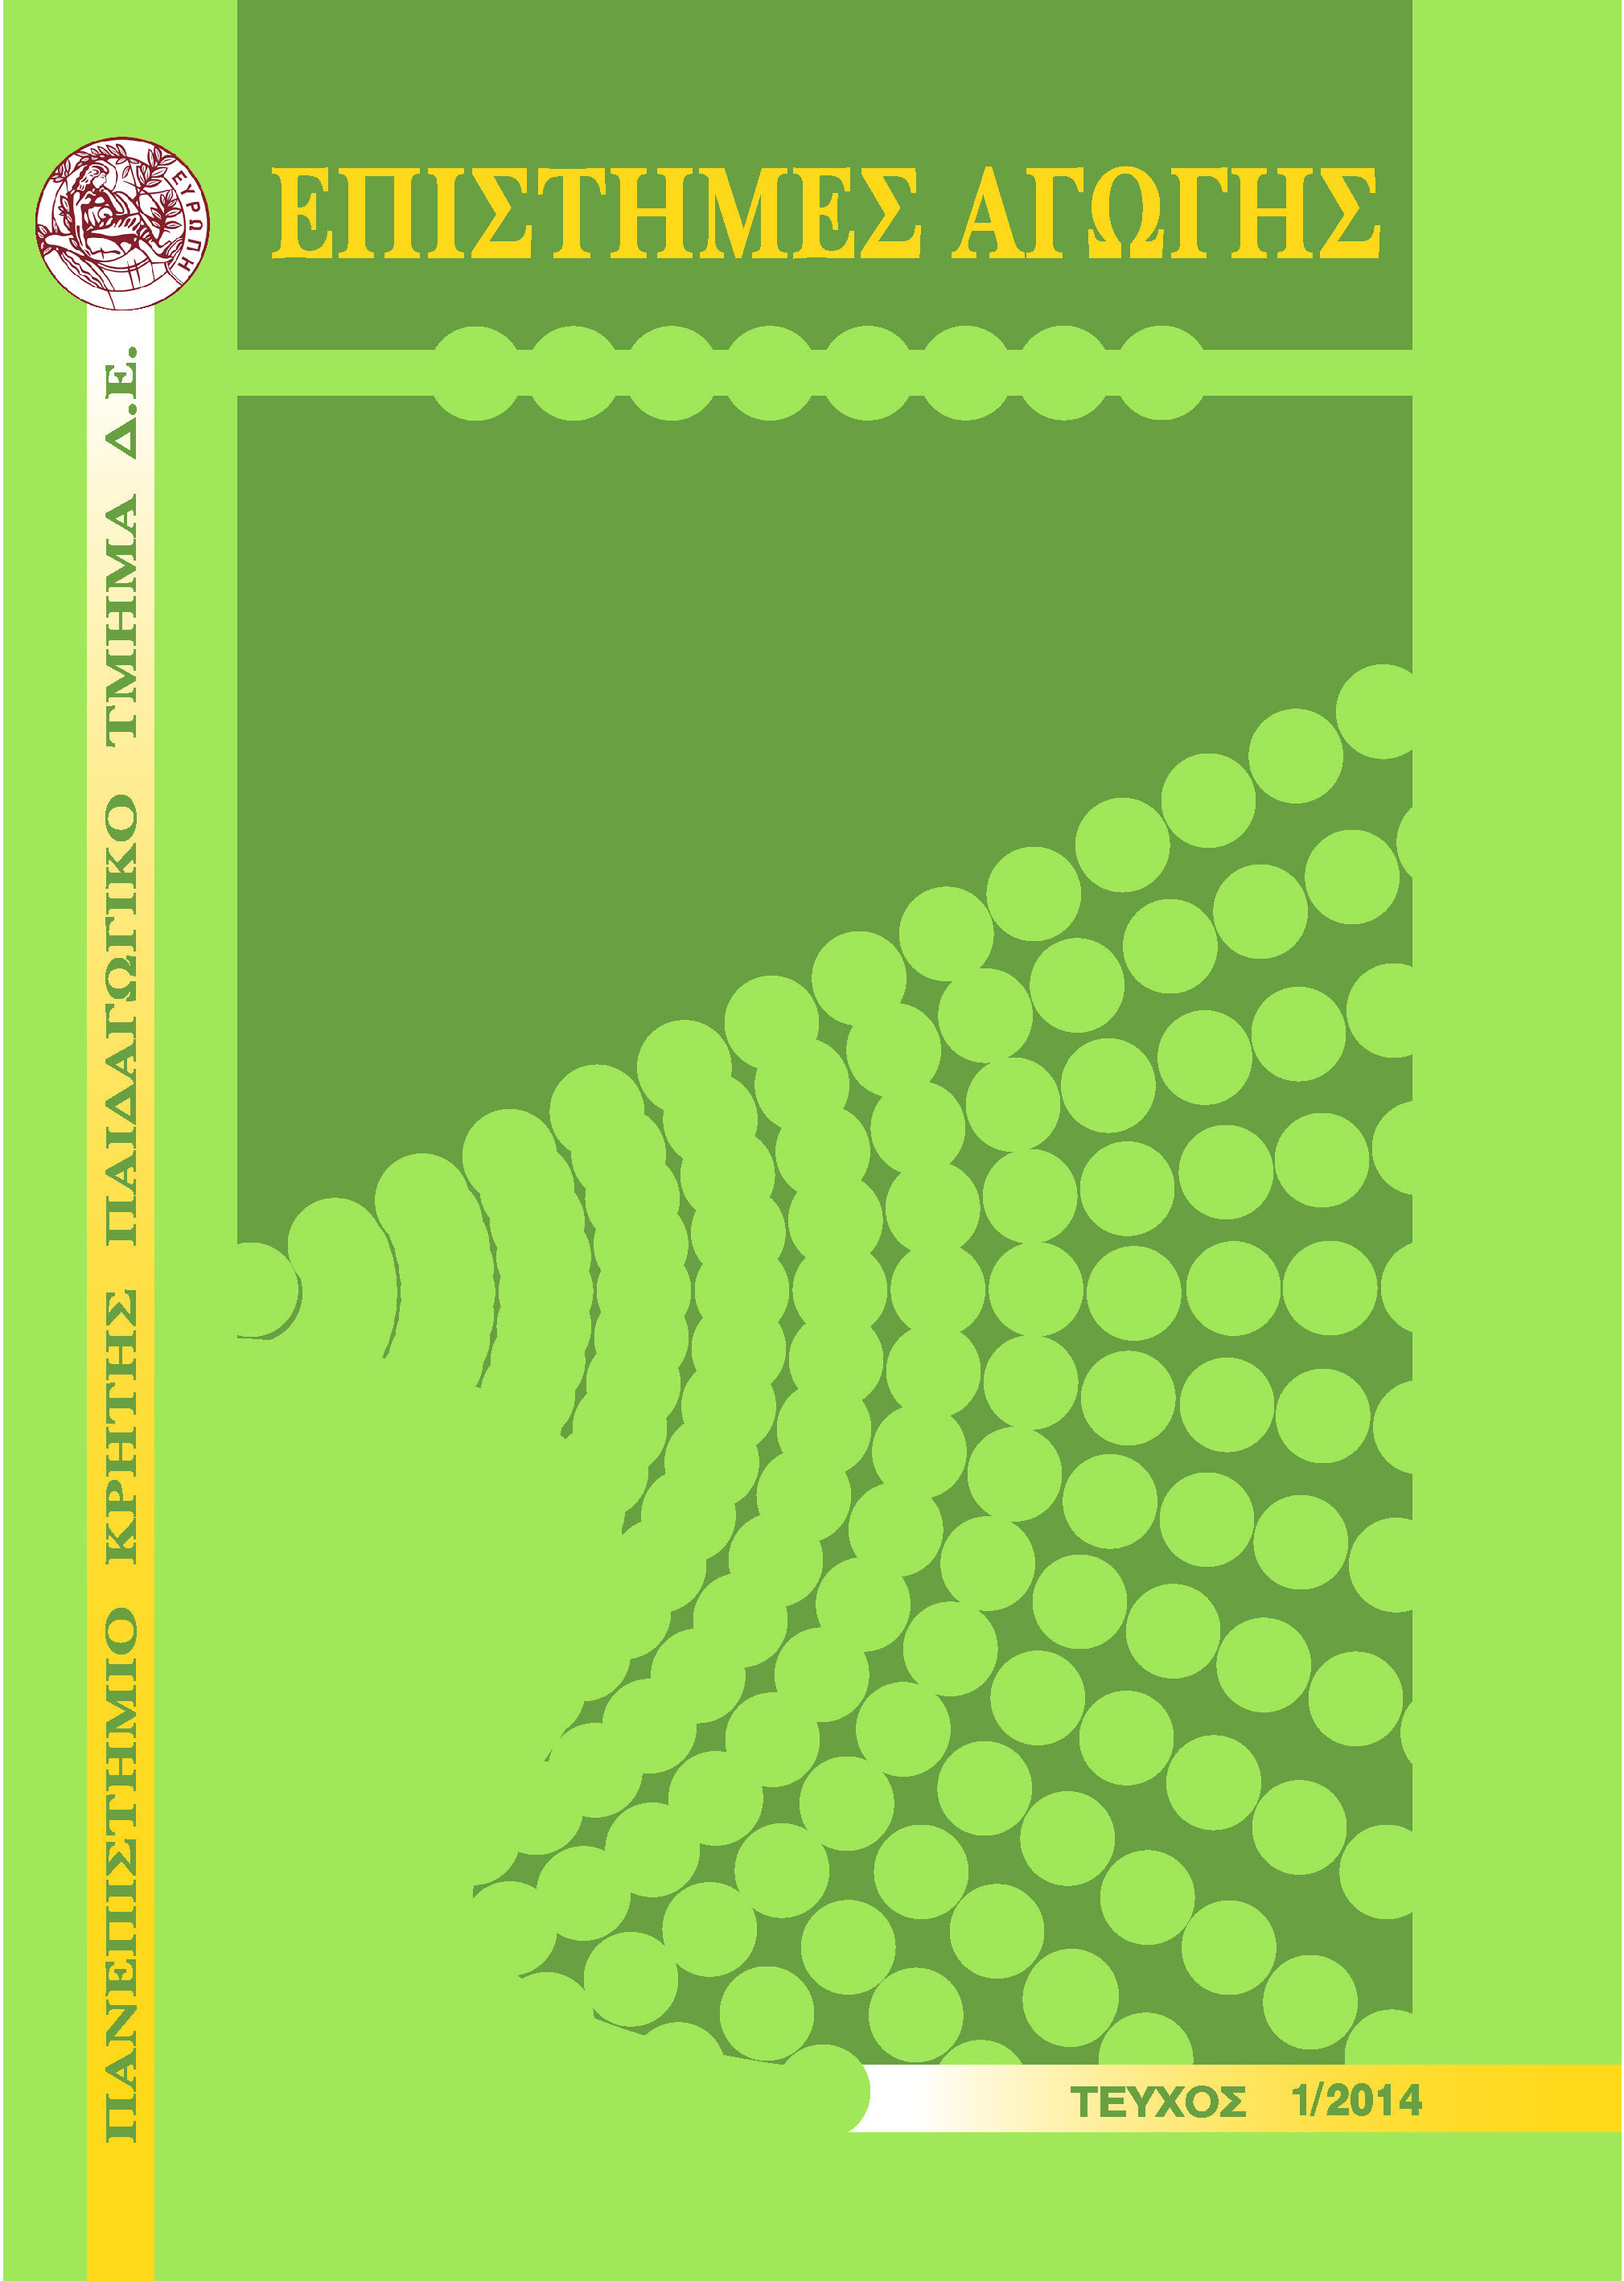 Education Sciences 2014, Issue 1 COVER